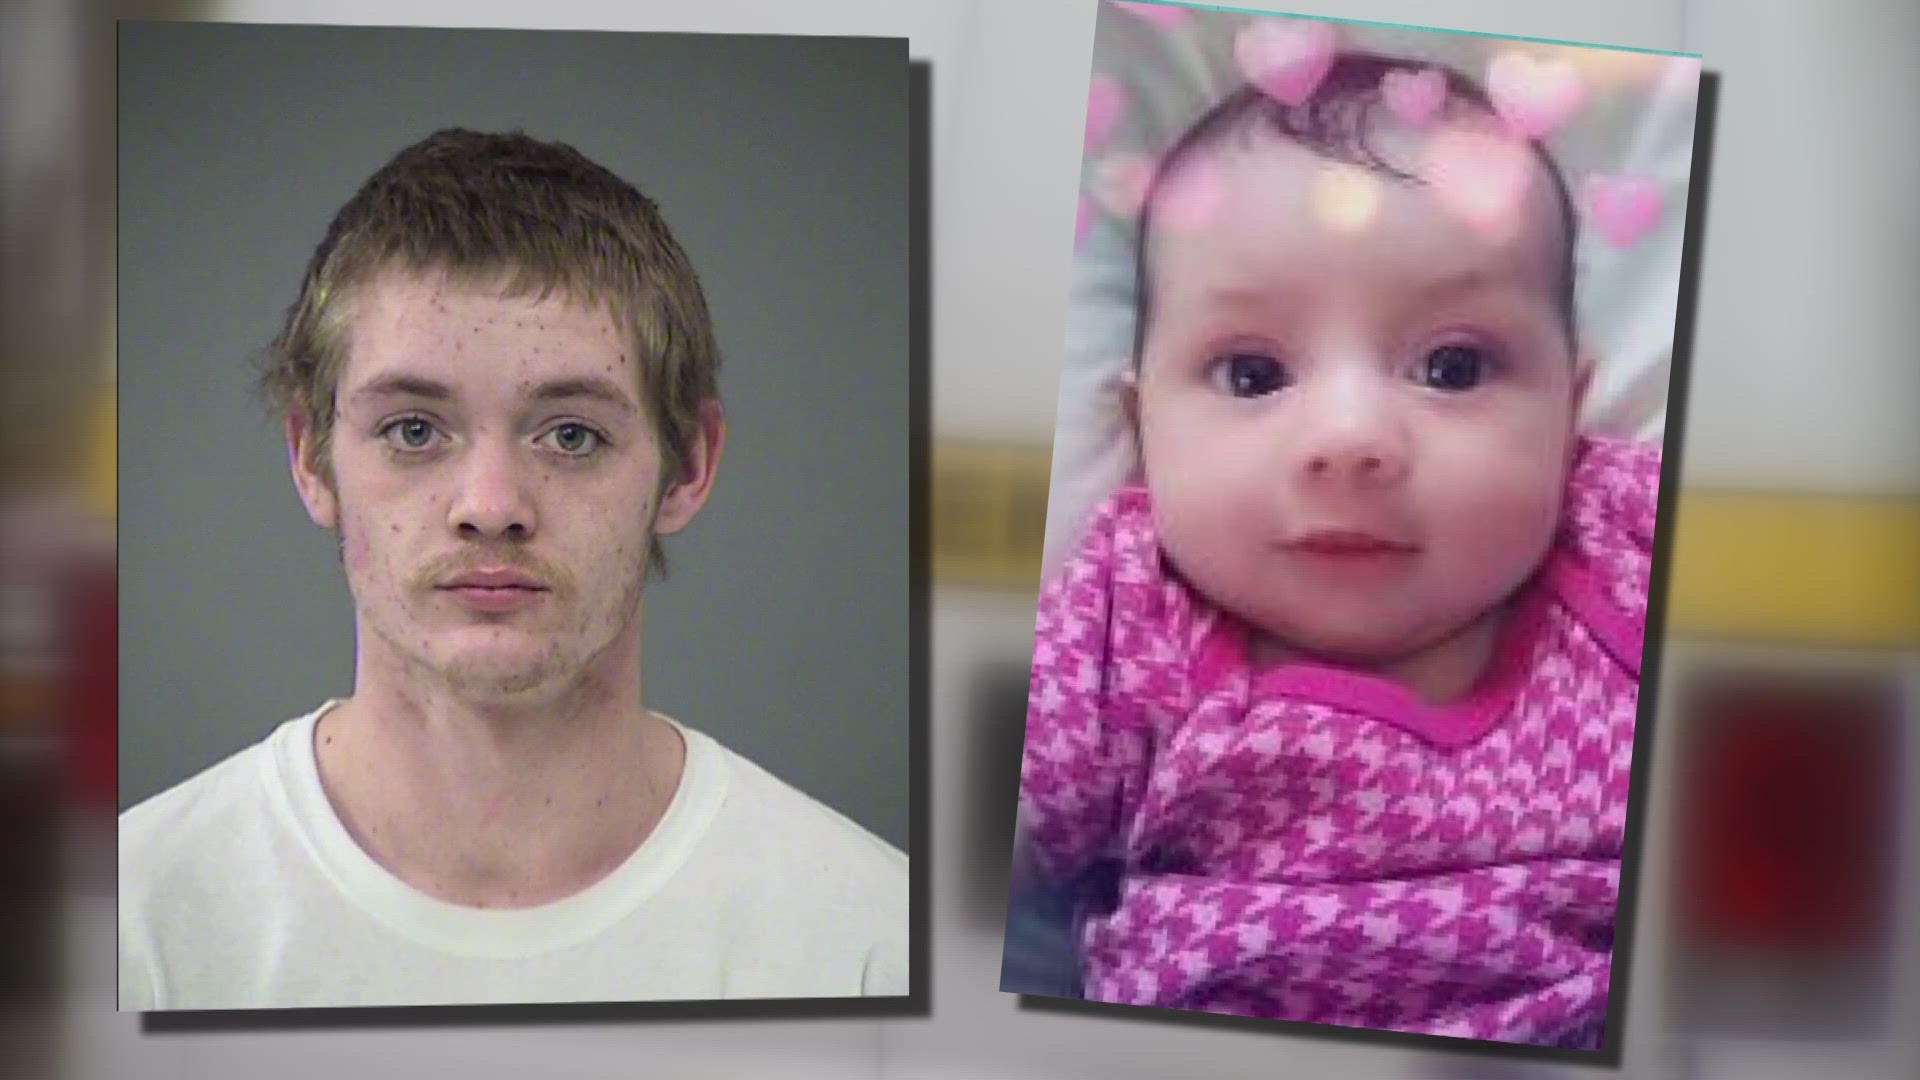 Under a plea agreement, Robert Lyons pleaded guilty to 1 count of felony neglect of a dependent in the assumed 2019 death of Amiah Robertson.